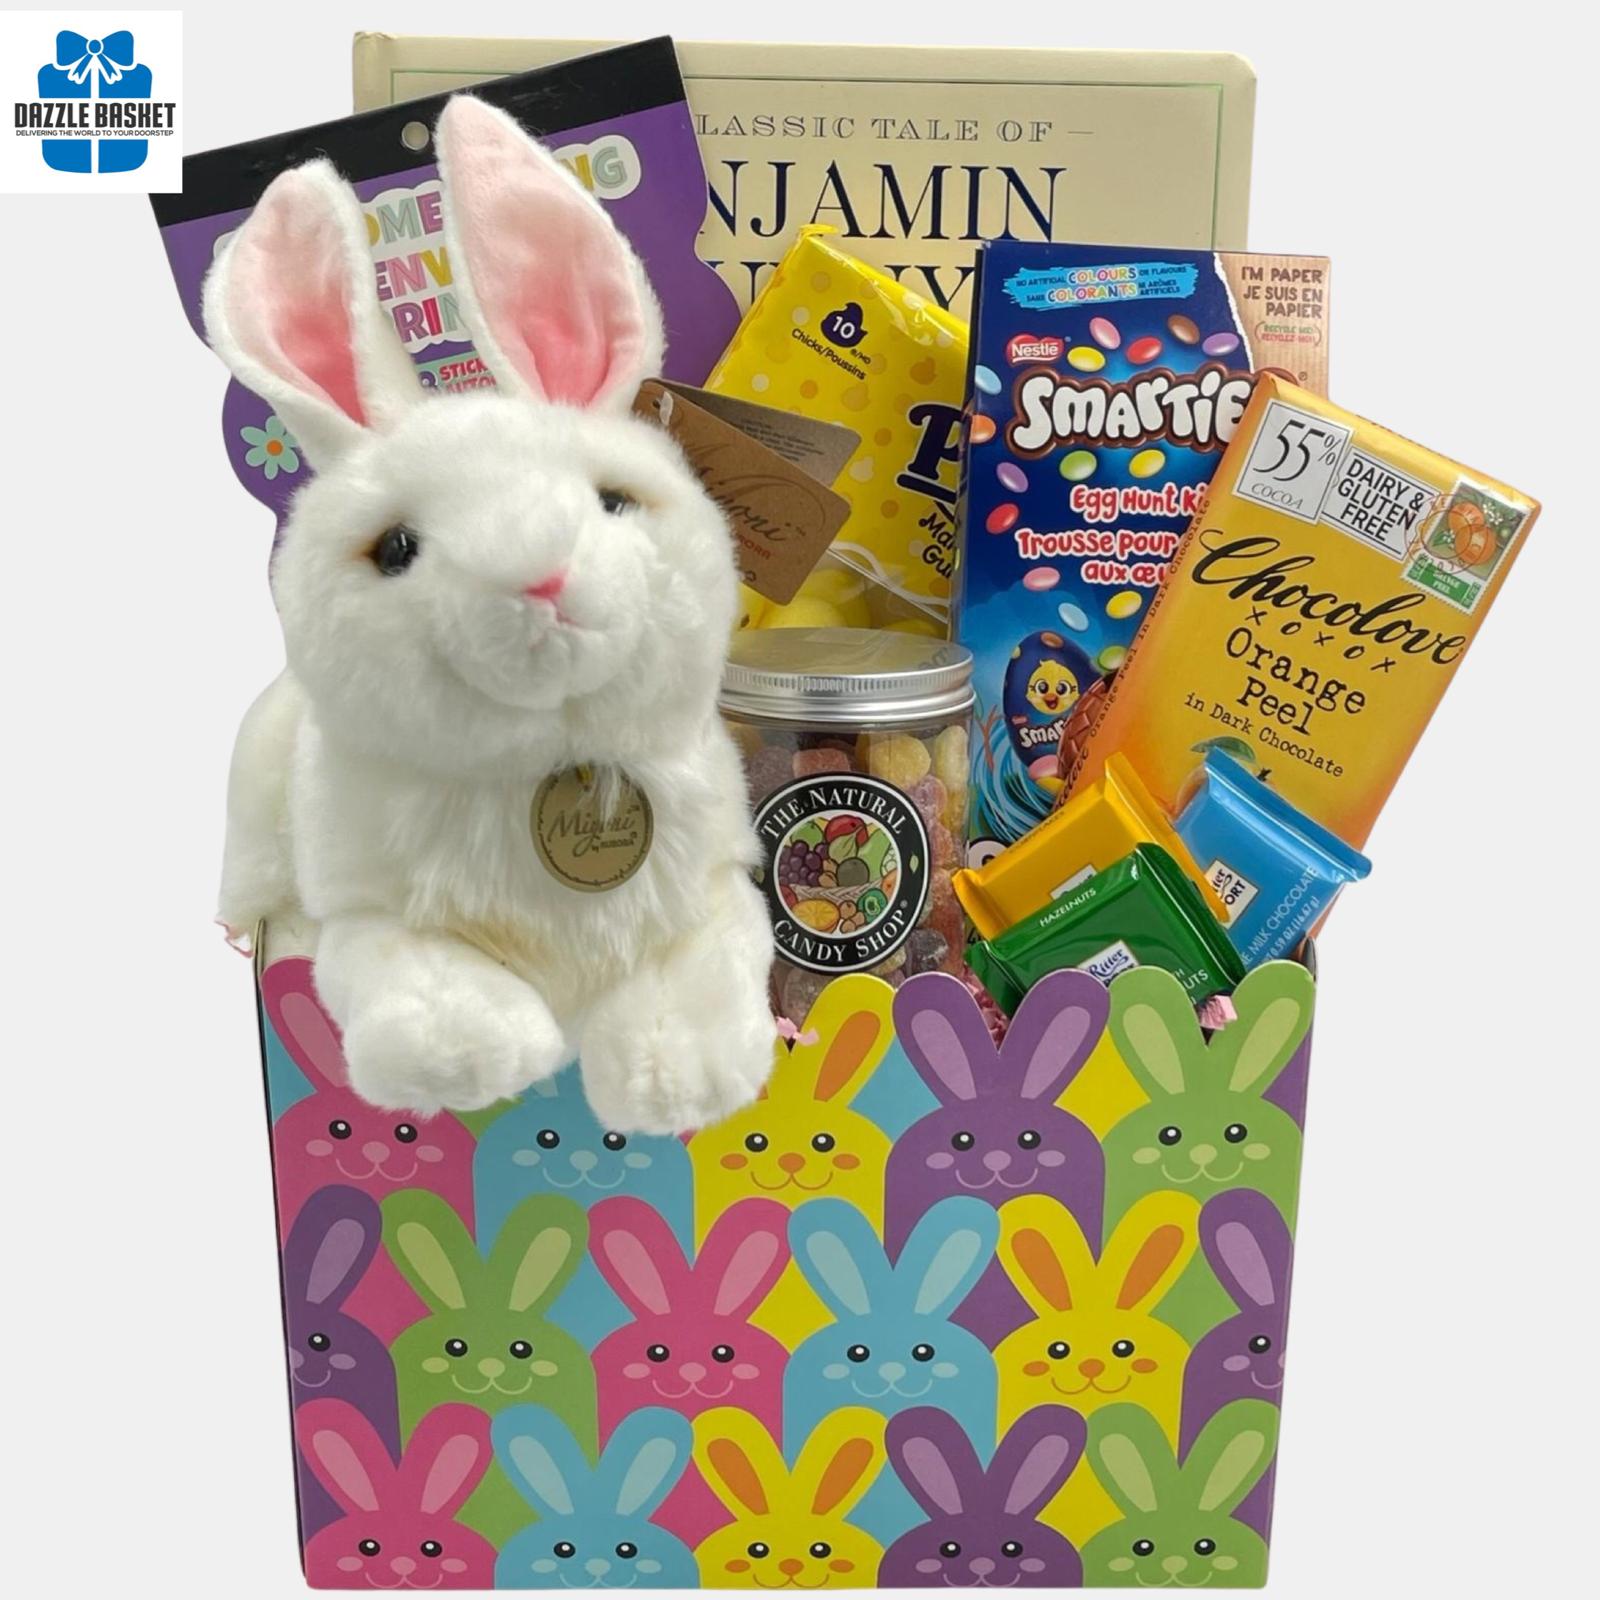 A Calgary Easter gift basket with Easter bunny plush toy and themed chocolates and gourmet snacks arranged beautifully in a bunny themed box.